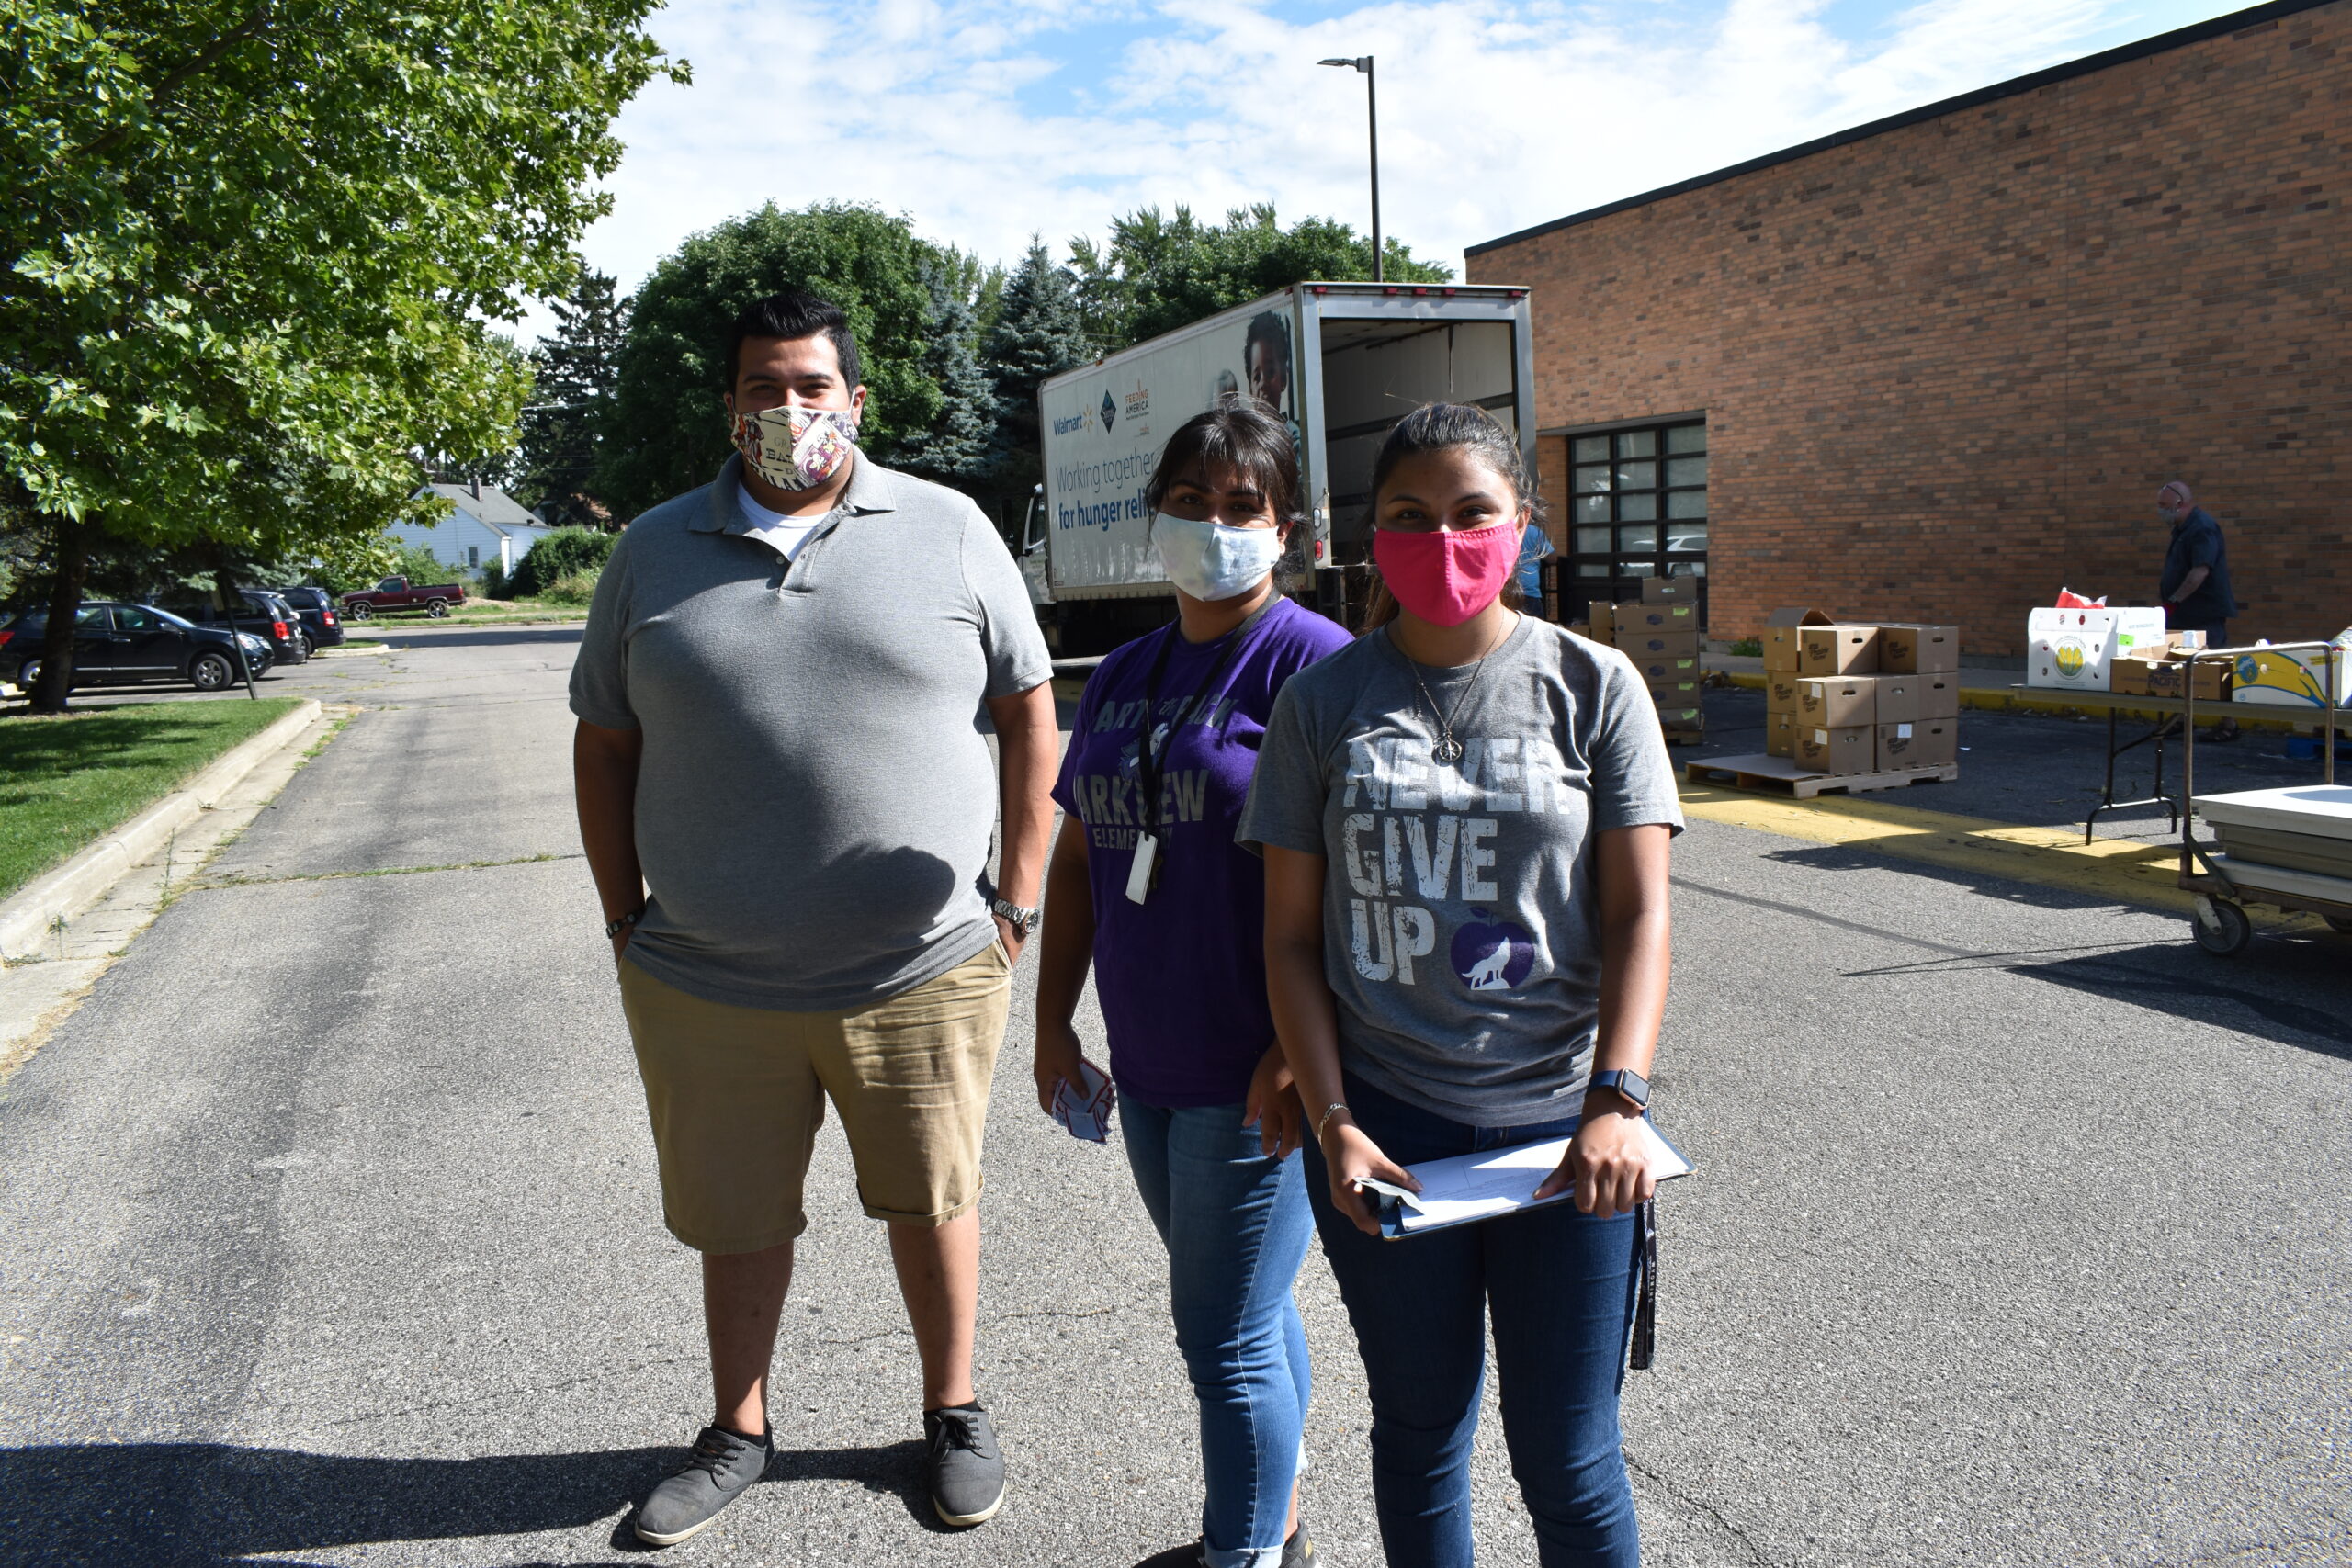 The three community coordinators stand in front of a Mobile Pantry